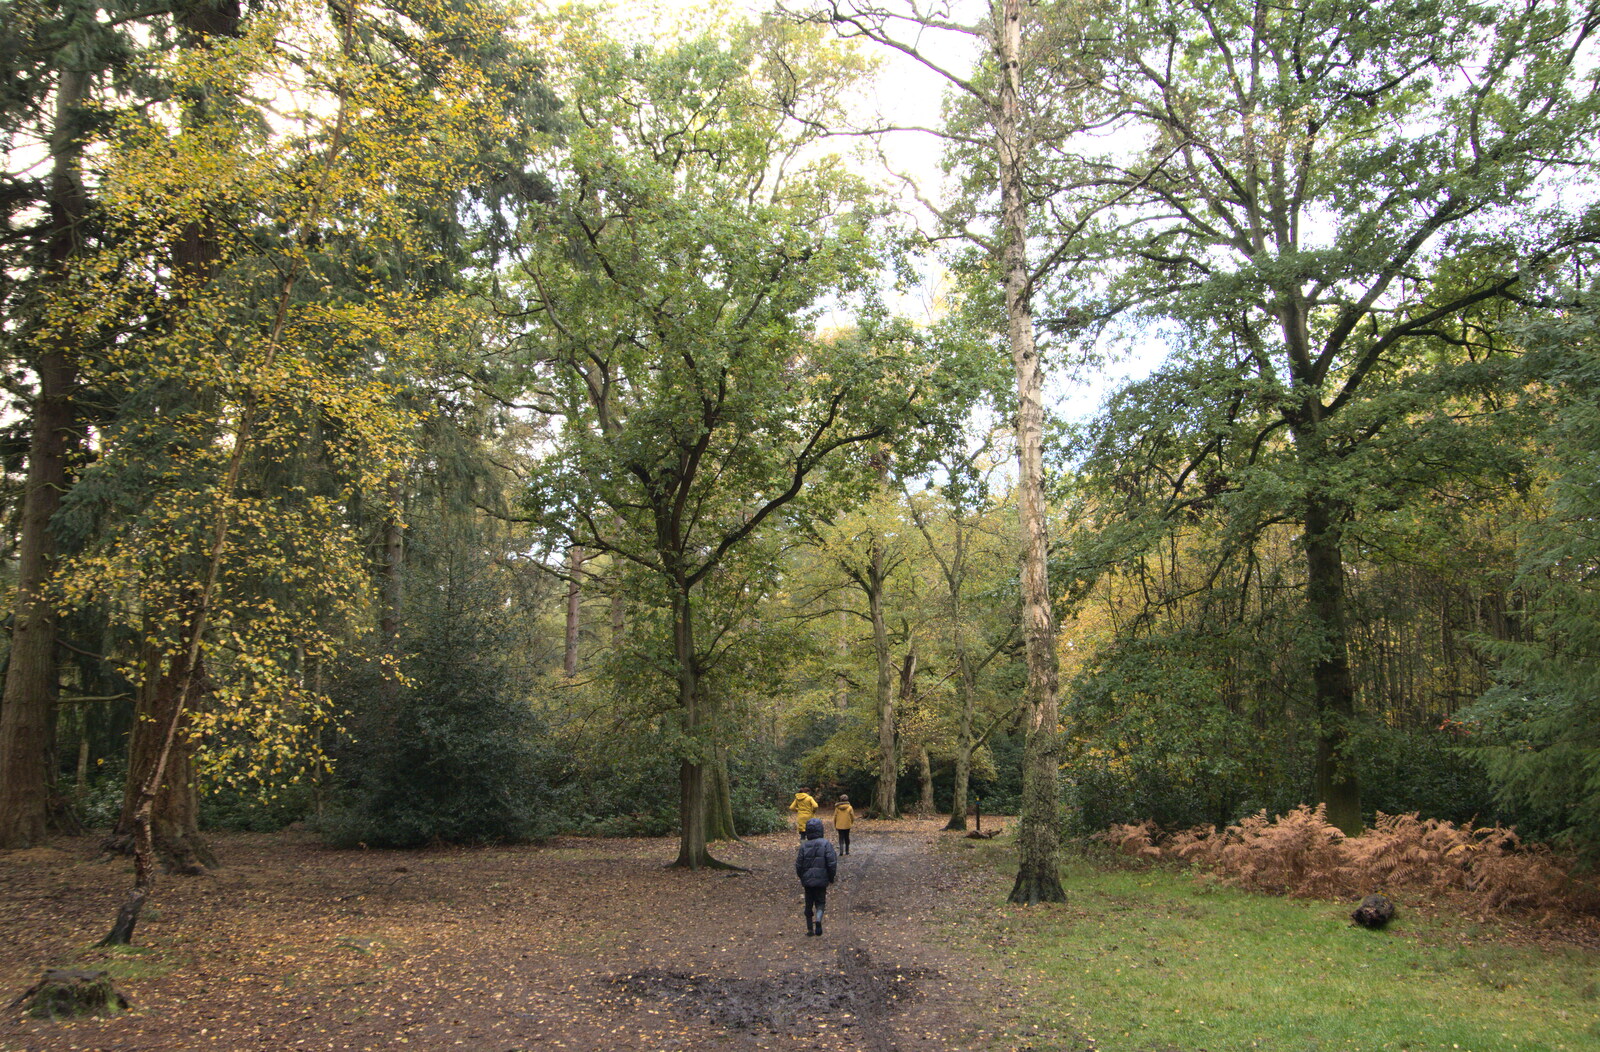 Off into the woods from A Trip to Sandringham Estate, Norfolk - 31st October 2020